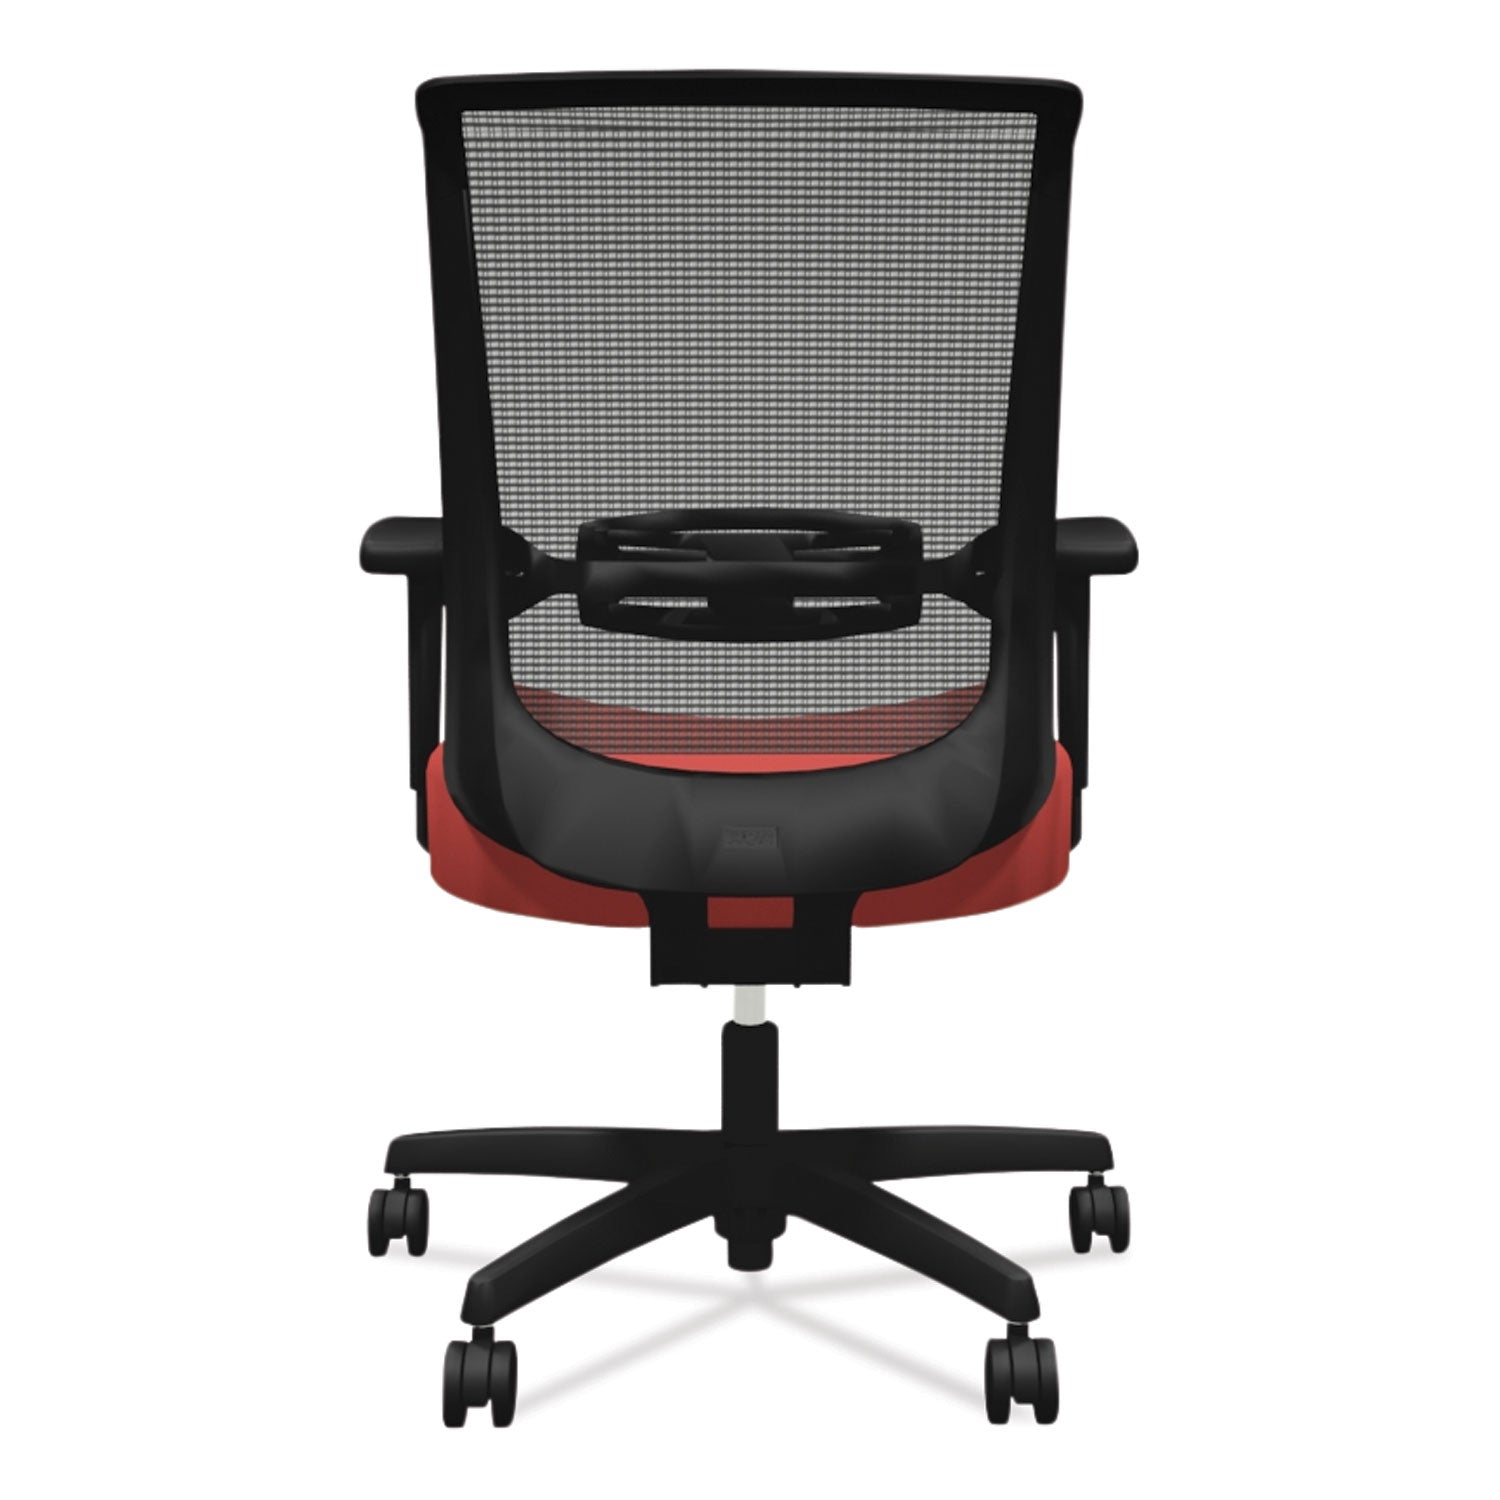 convergence-mid-back-task-chair-synchro-tilt-and-seat-glide-supports-up-to-275-lb-red-seat-black-back-base_honcmy1acu67 - 4